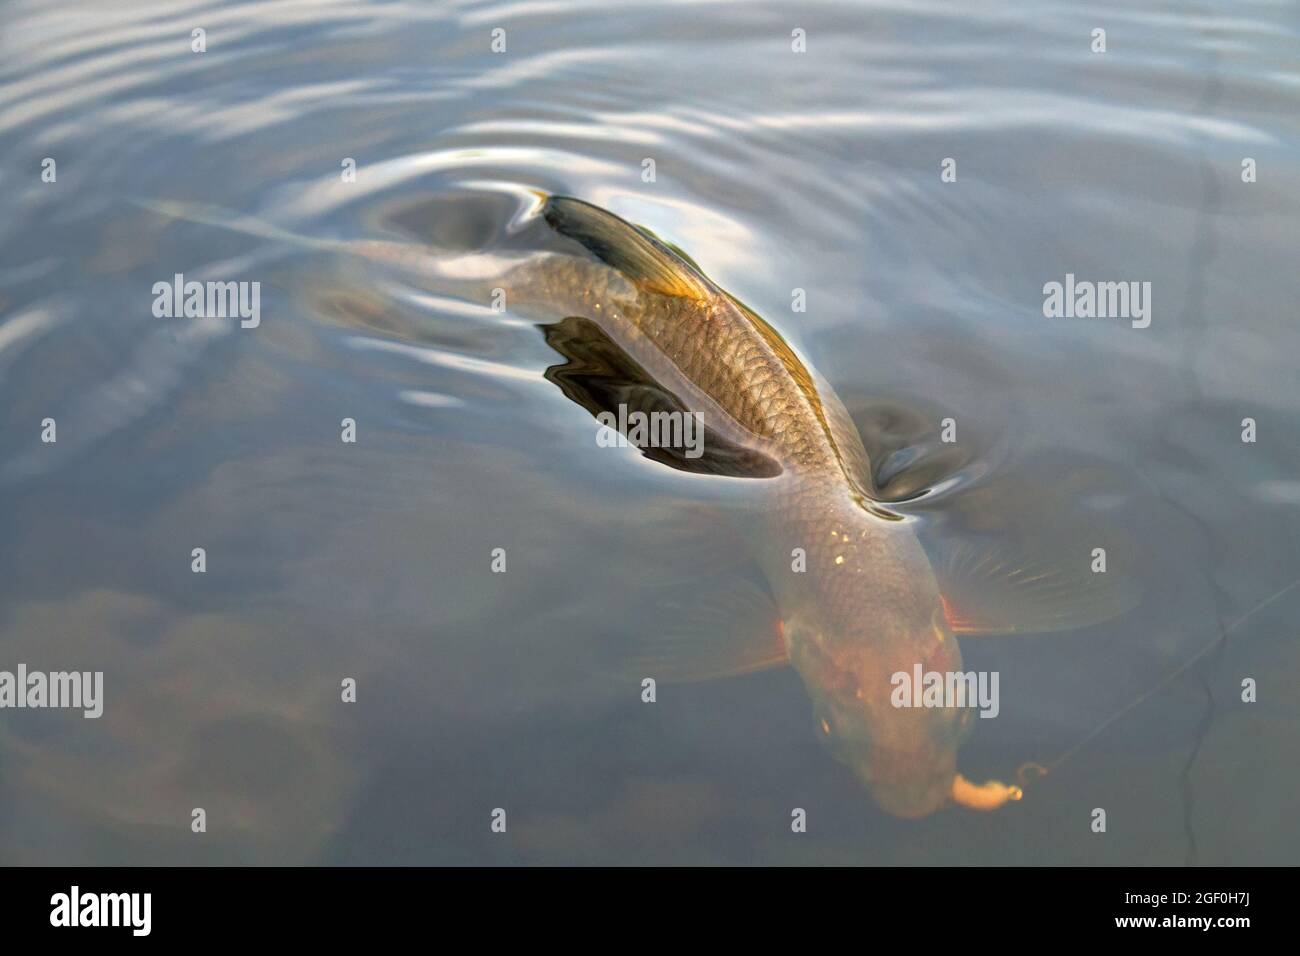 Catching fish with fishing line for bottom fishing in the northern river in the spring - sportfishing. Eastern bream (Abramis brama) fishing, small br Stock Photo